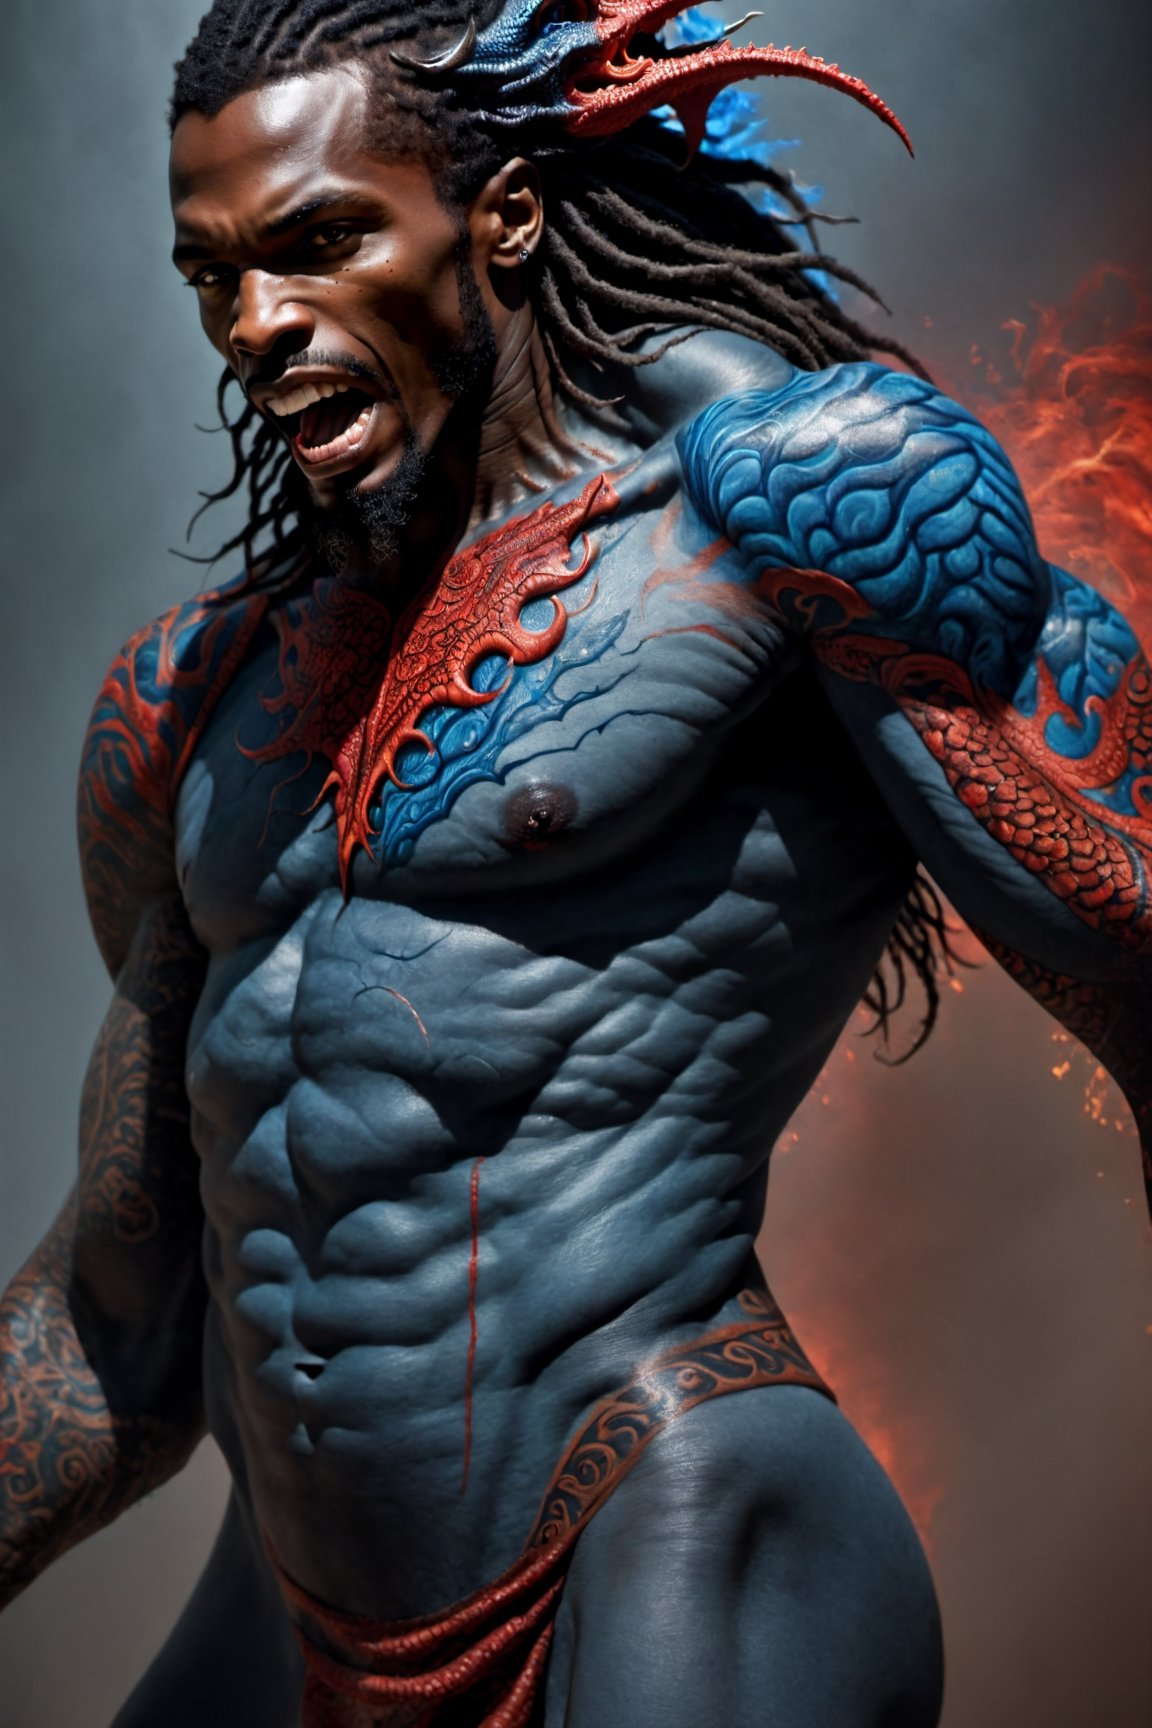 An sexy black african mans arm and shoulder, telephoto lens shot, man is staring at the viewer, raging, long hair, the arm and shoulder are  covered in a very detailed intricate red and blue dragon tattoo that is protruding outfrom the skin, coming alive, its screaming, scratching, similar to dragon tattoo by Boris Vallejo, slowly you see the small dragon tattoo in parts is coming out of the skin and becoming a real version of the tattoo, sticking out, scales, extended claws, 16K, movie still, cinematic, 